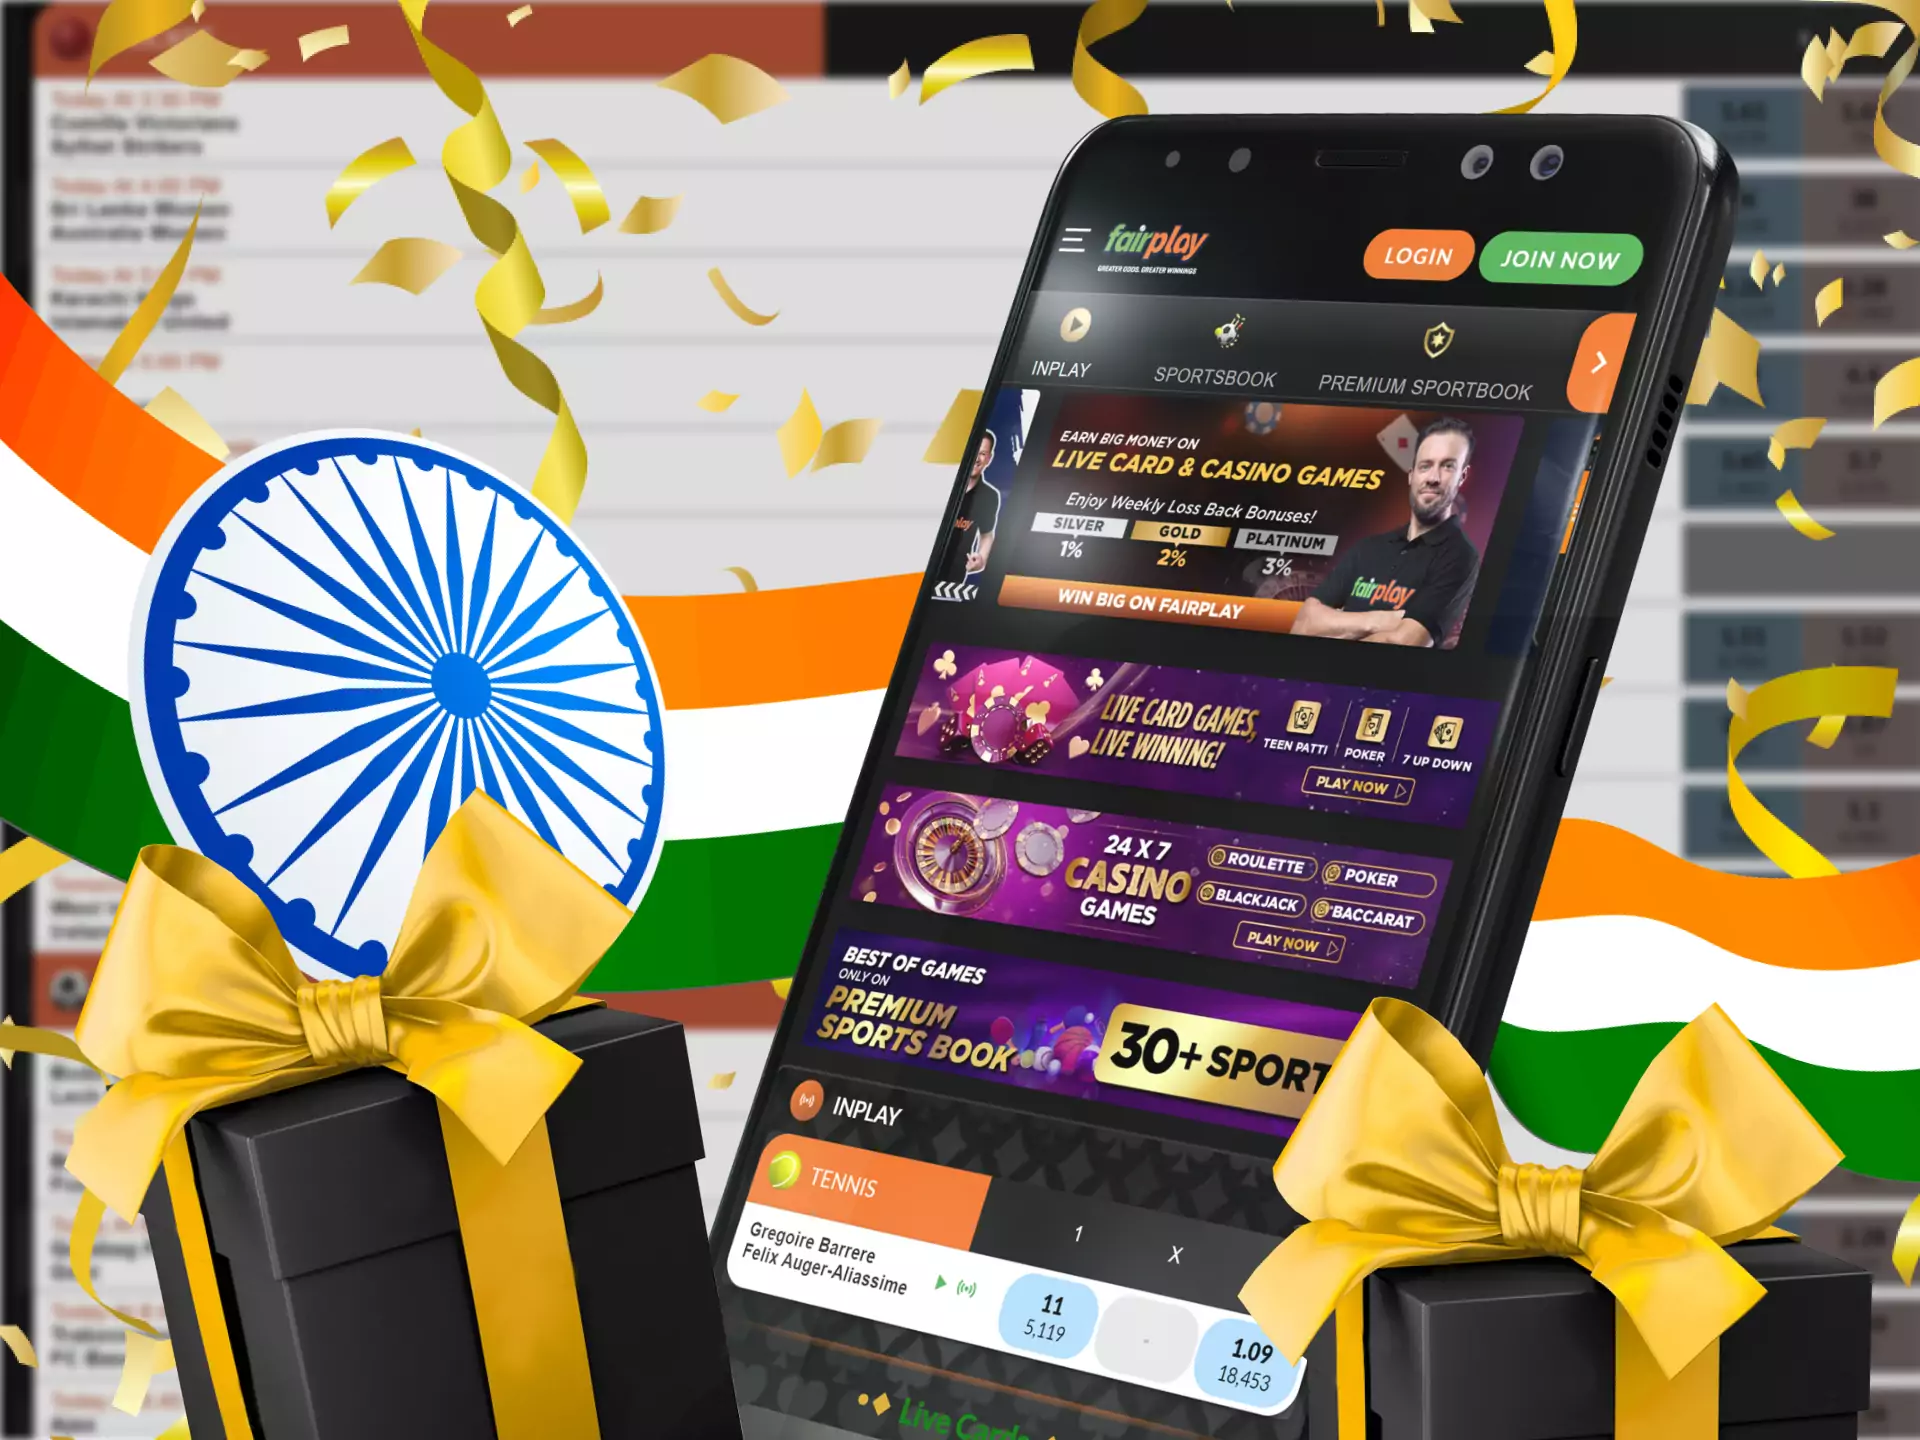 The Fairplay app has many benefits and bonuses for users from India.